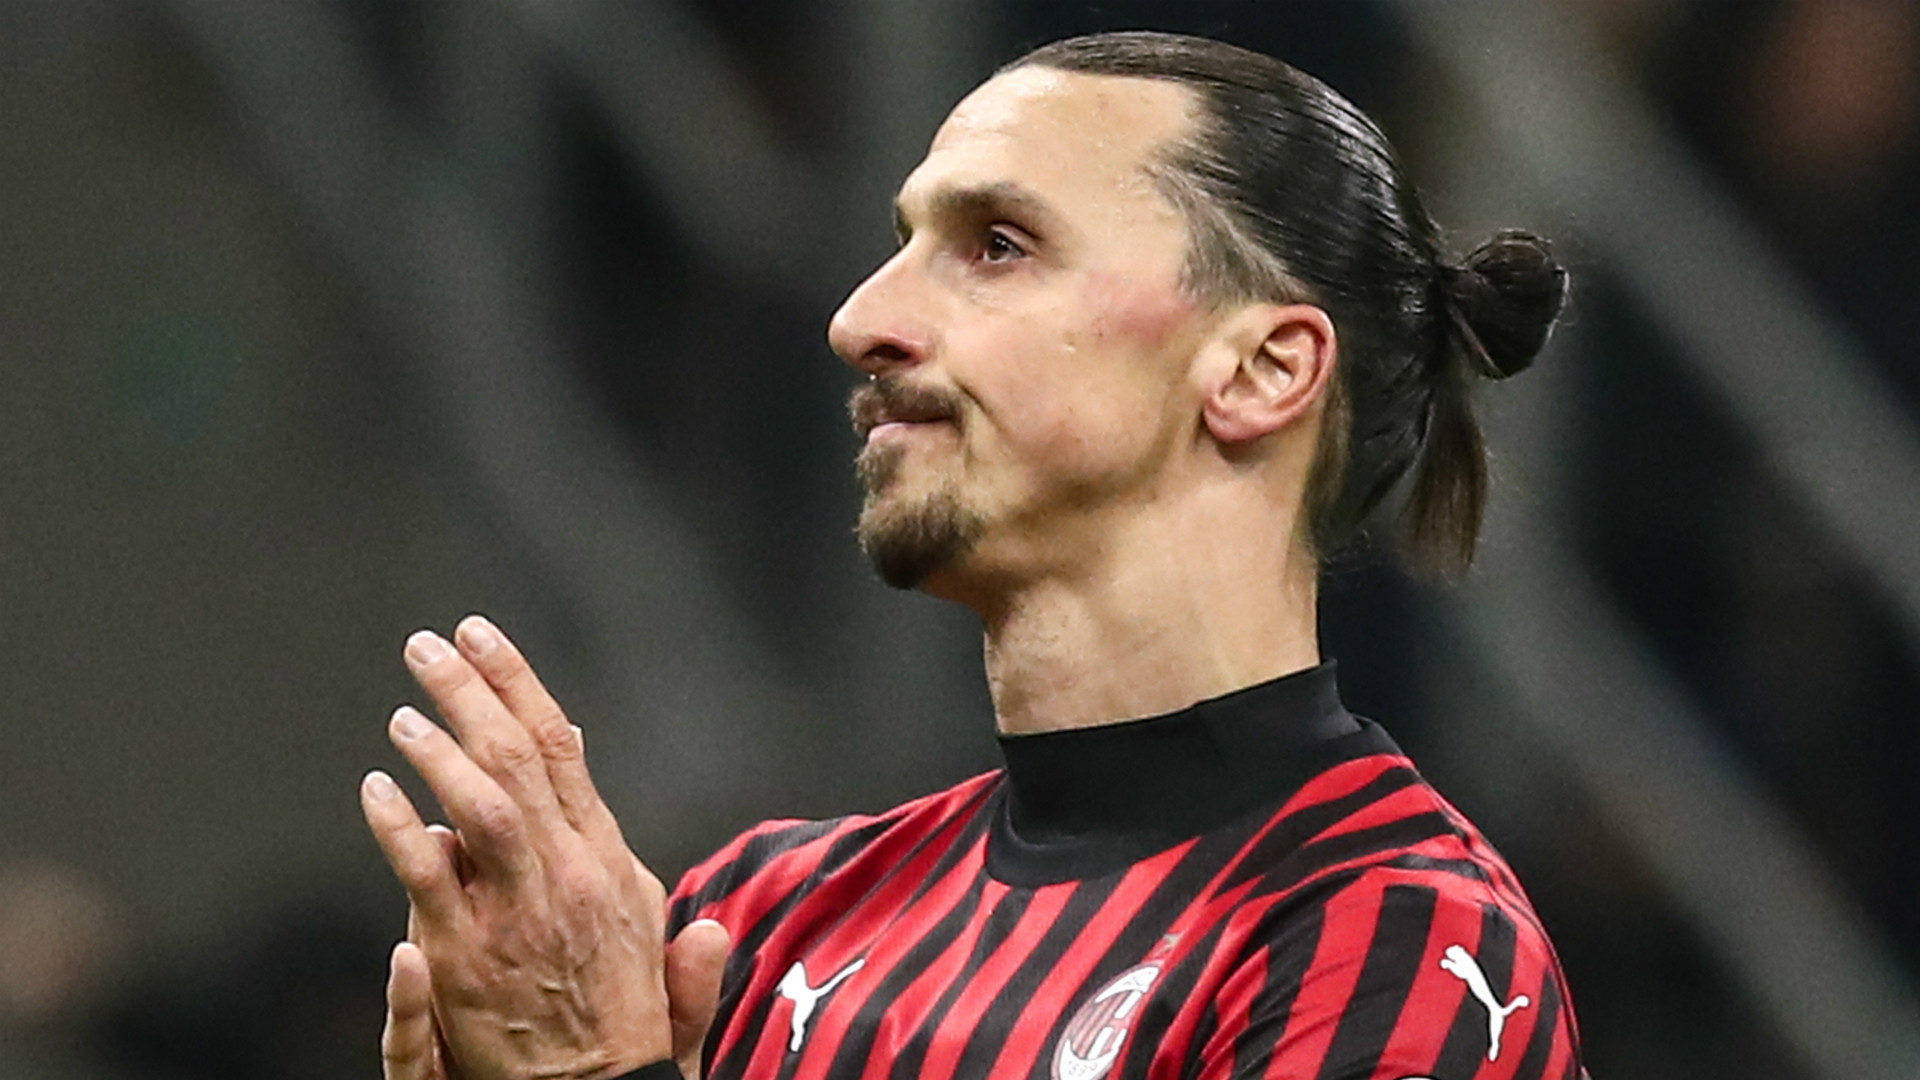 'Playing with Ibrahimovic is a gift' - Milan's Hernandez delighted to learn from 'one of the best players in the world'